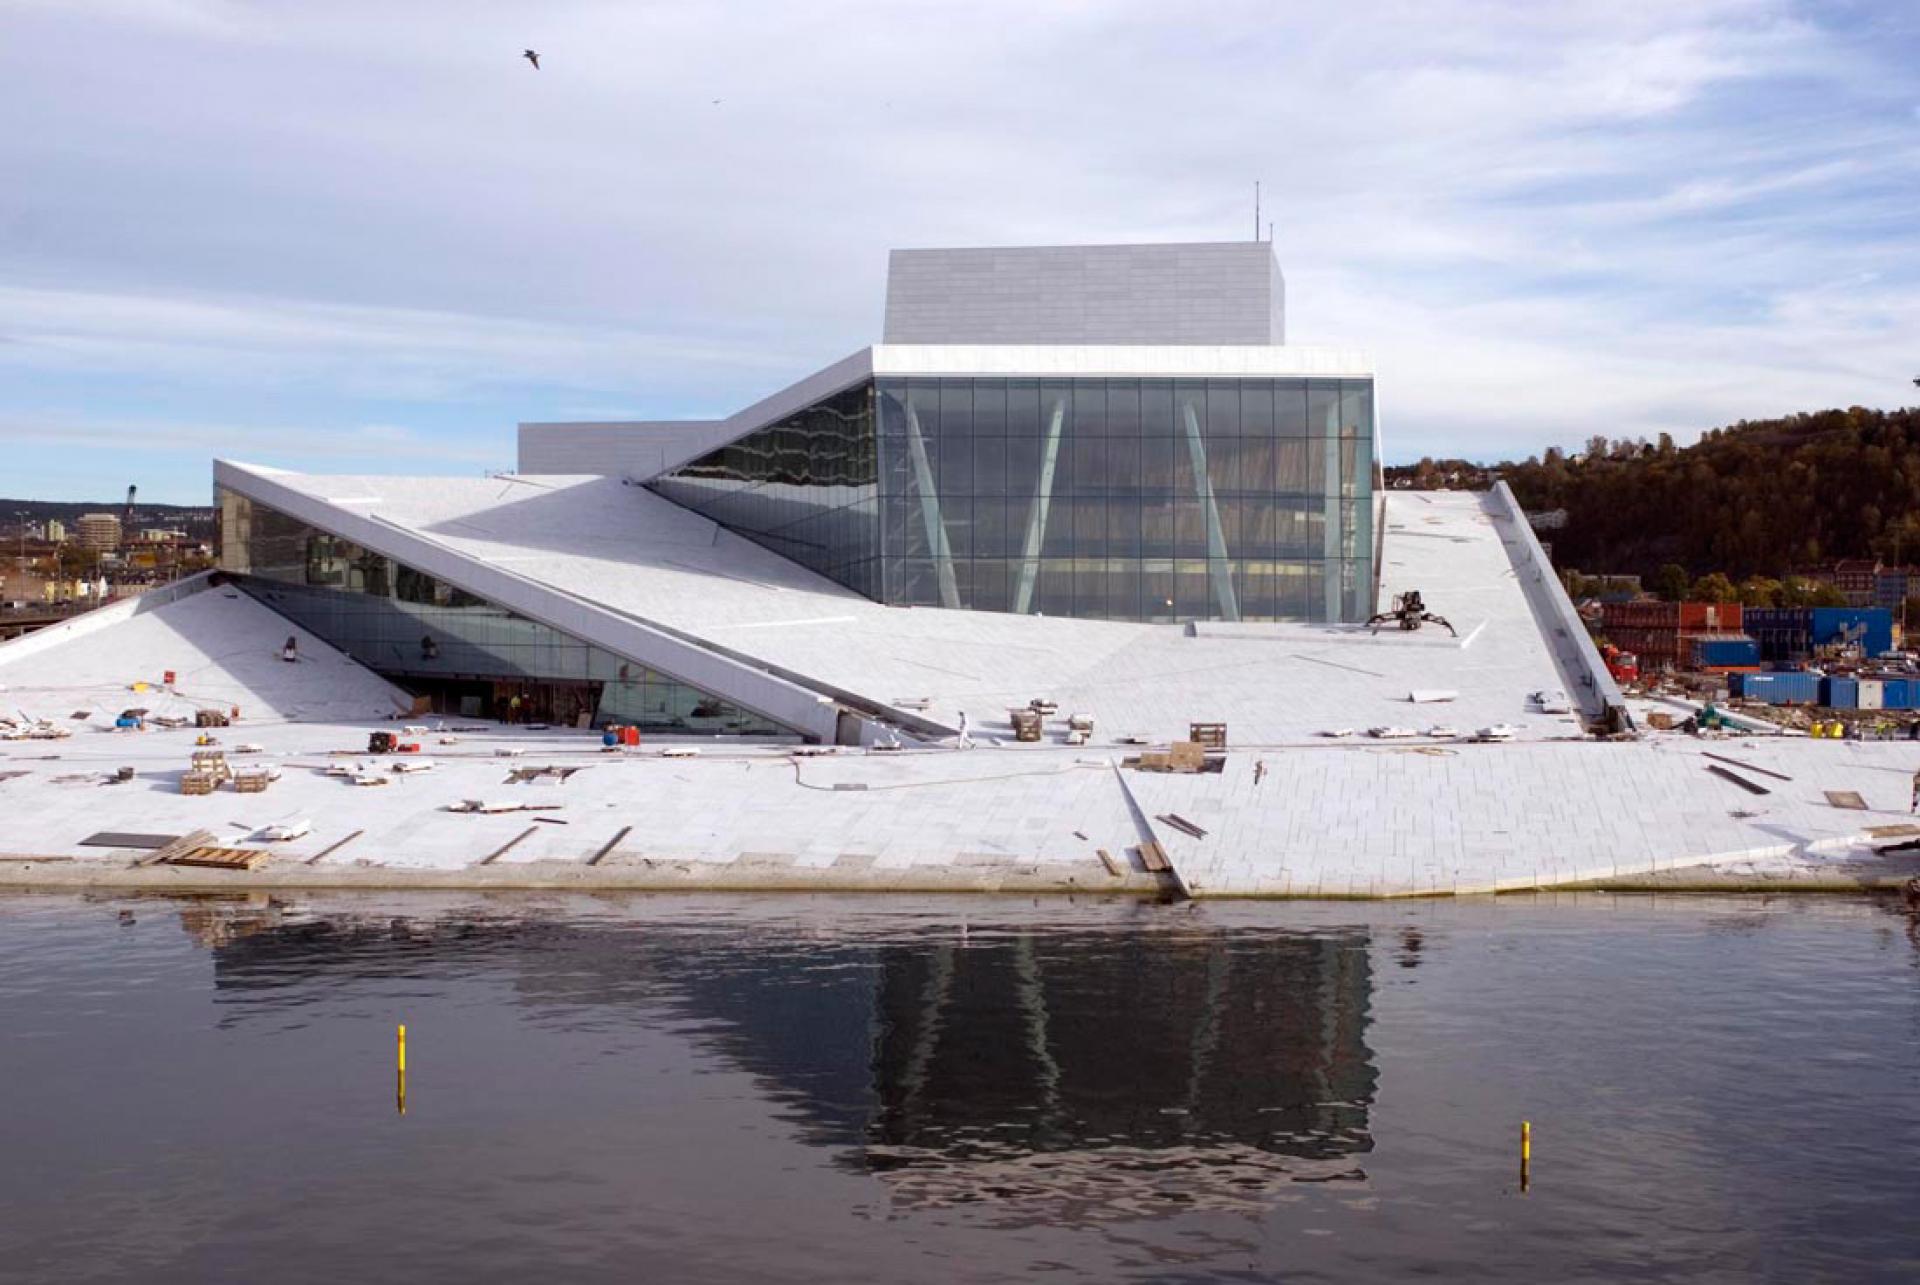 In 1999 Snøhetta won a design competition for a new opera house among 350 entries received. | Photo via Snøhetta